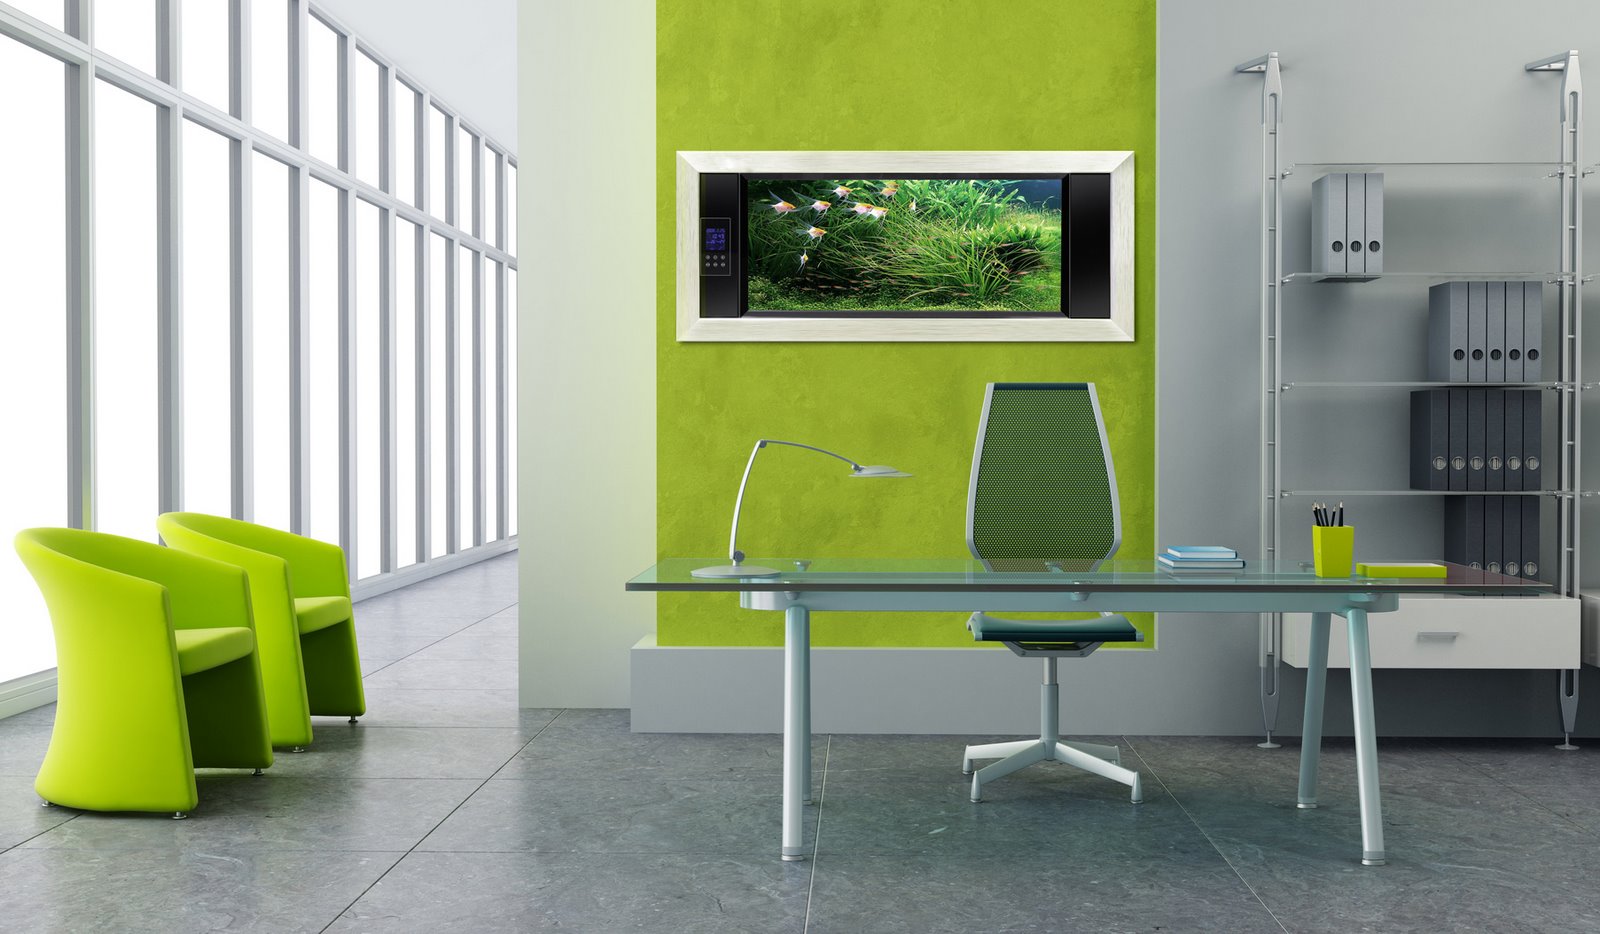 Home Office Tasteful Sophisticated Home Office Design Using Tasteful Modern Interior And Furniture With Glass Computer Desk And Green Office Chair Design Ideas Office Home Office Design Ideas For Narrow Room